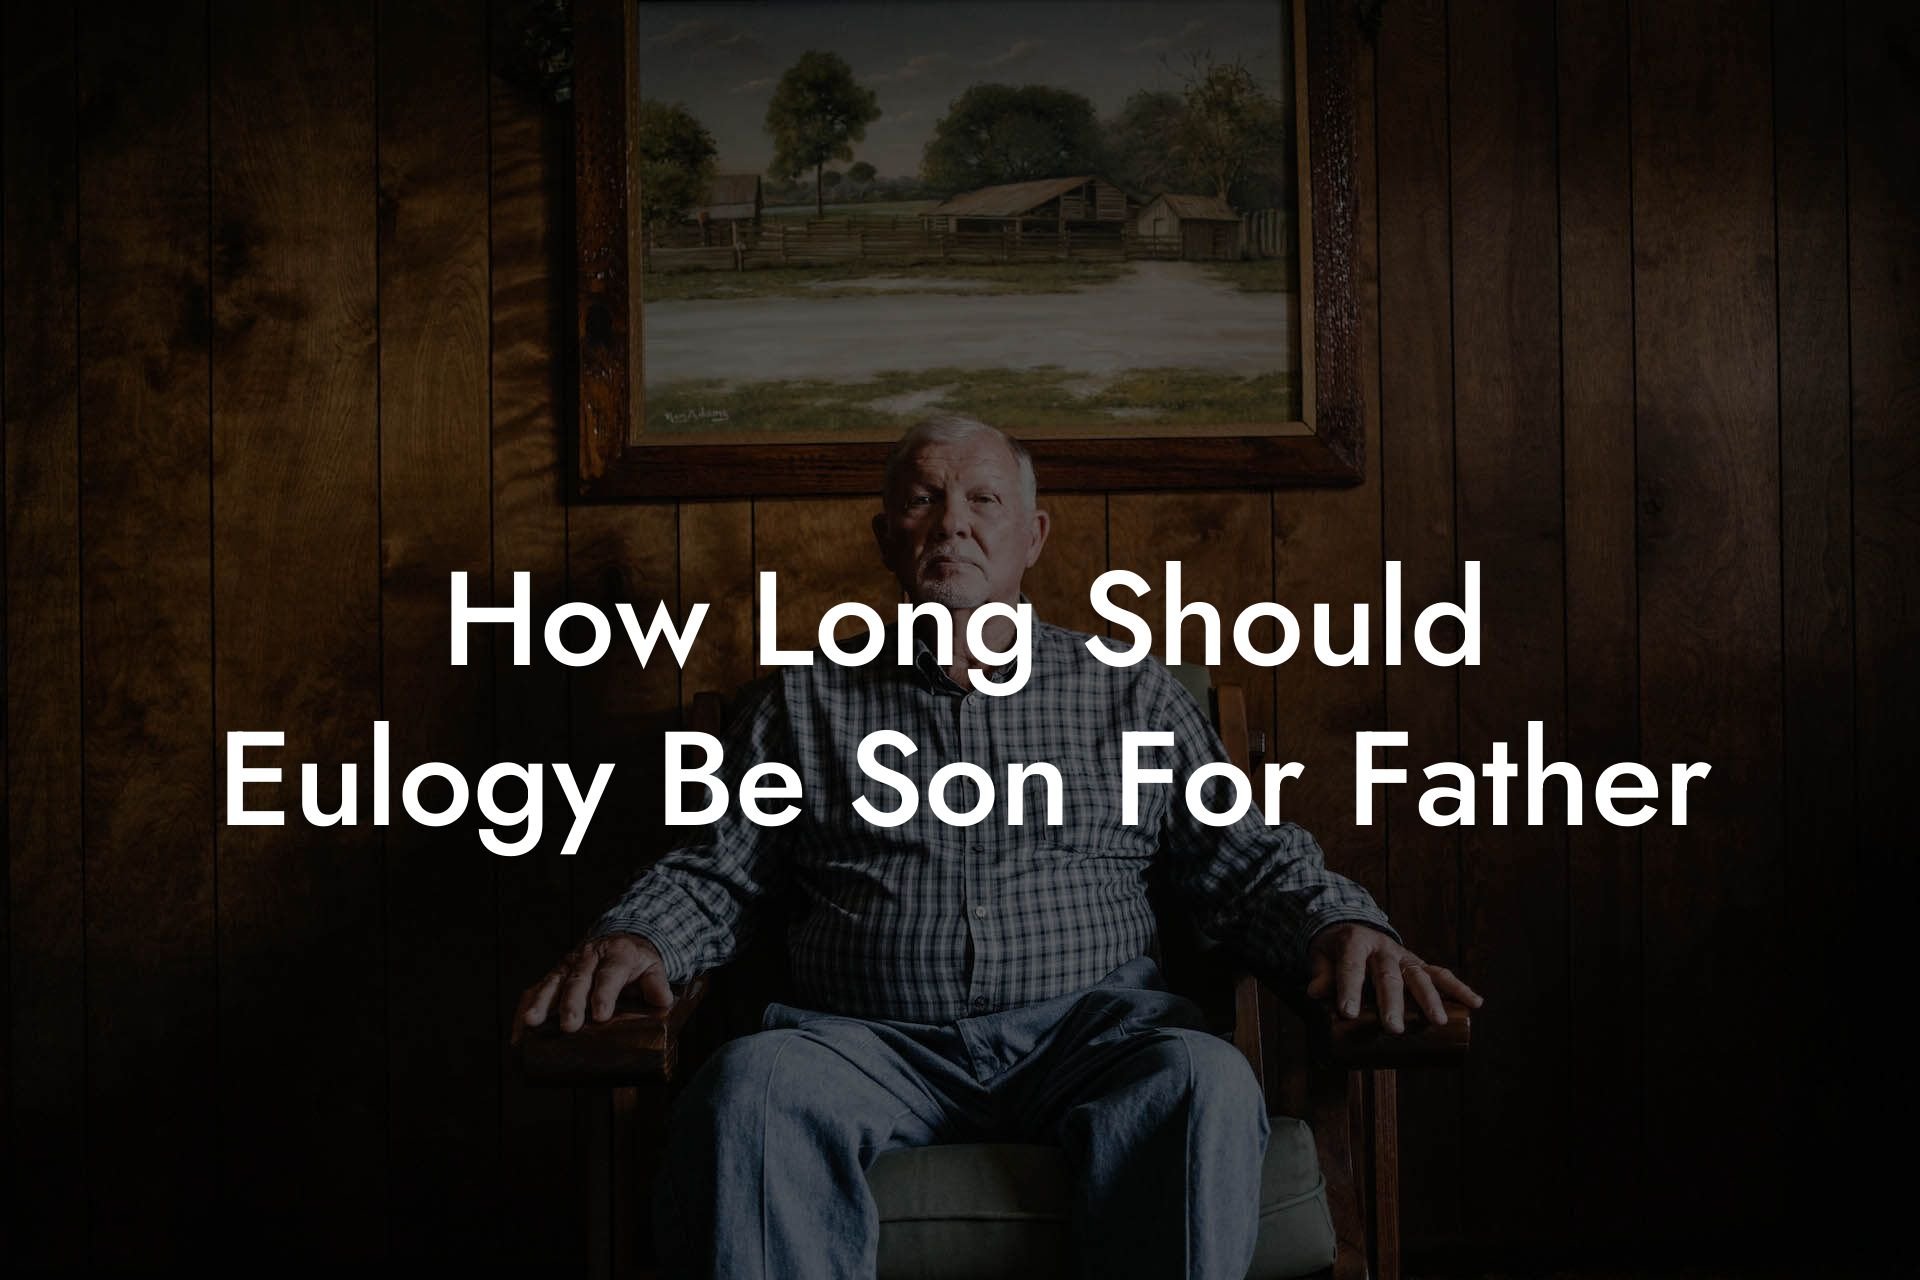 How Long Should Eulogy Be Son For Father